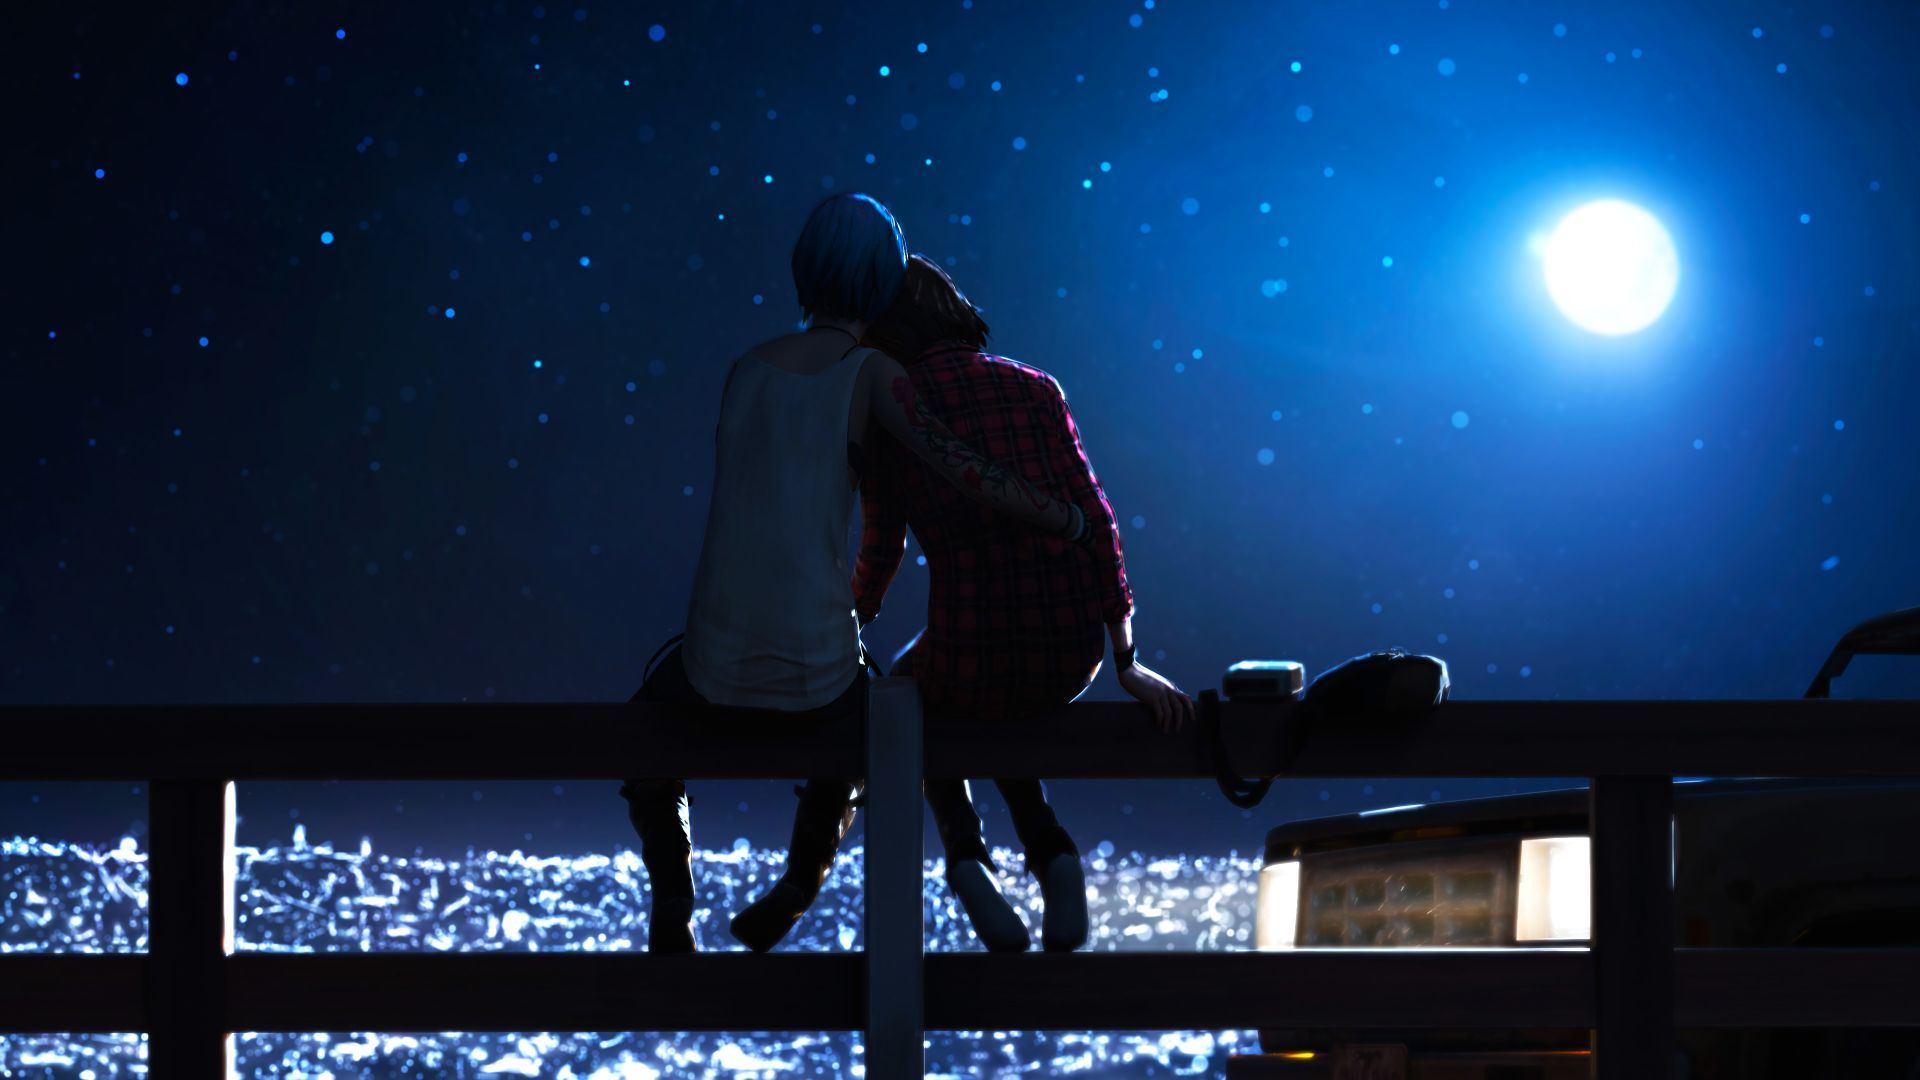 Desktop wallpaper outdoor, night, couple, video game, life is strange, HD image, picture, background, 0bbcd9